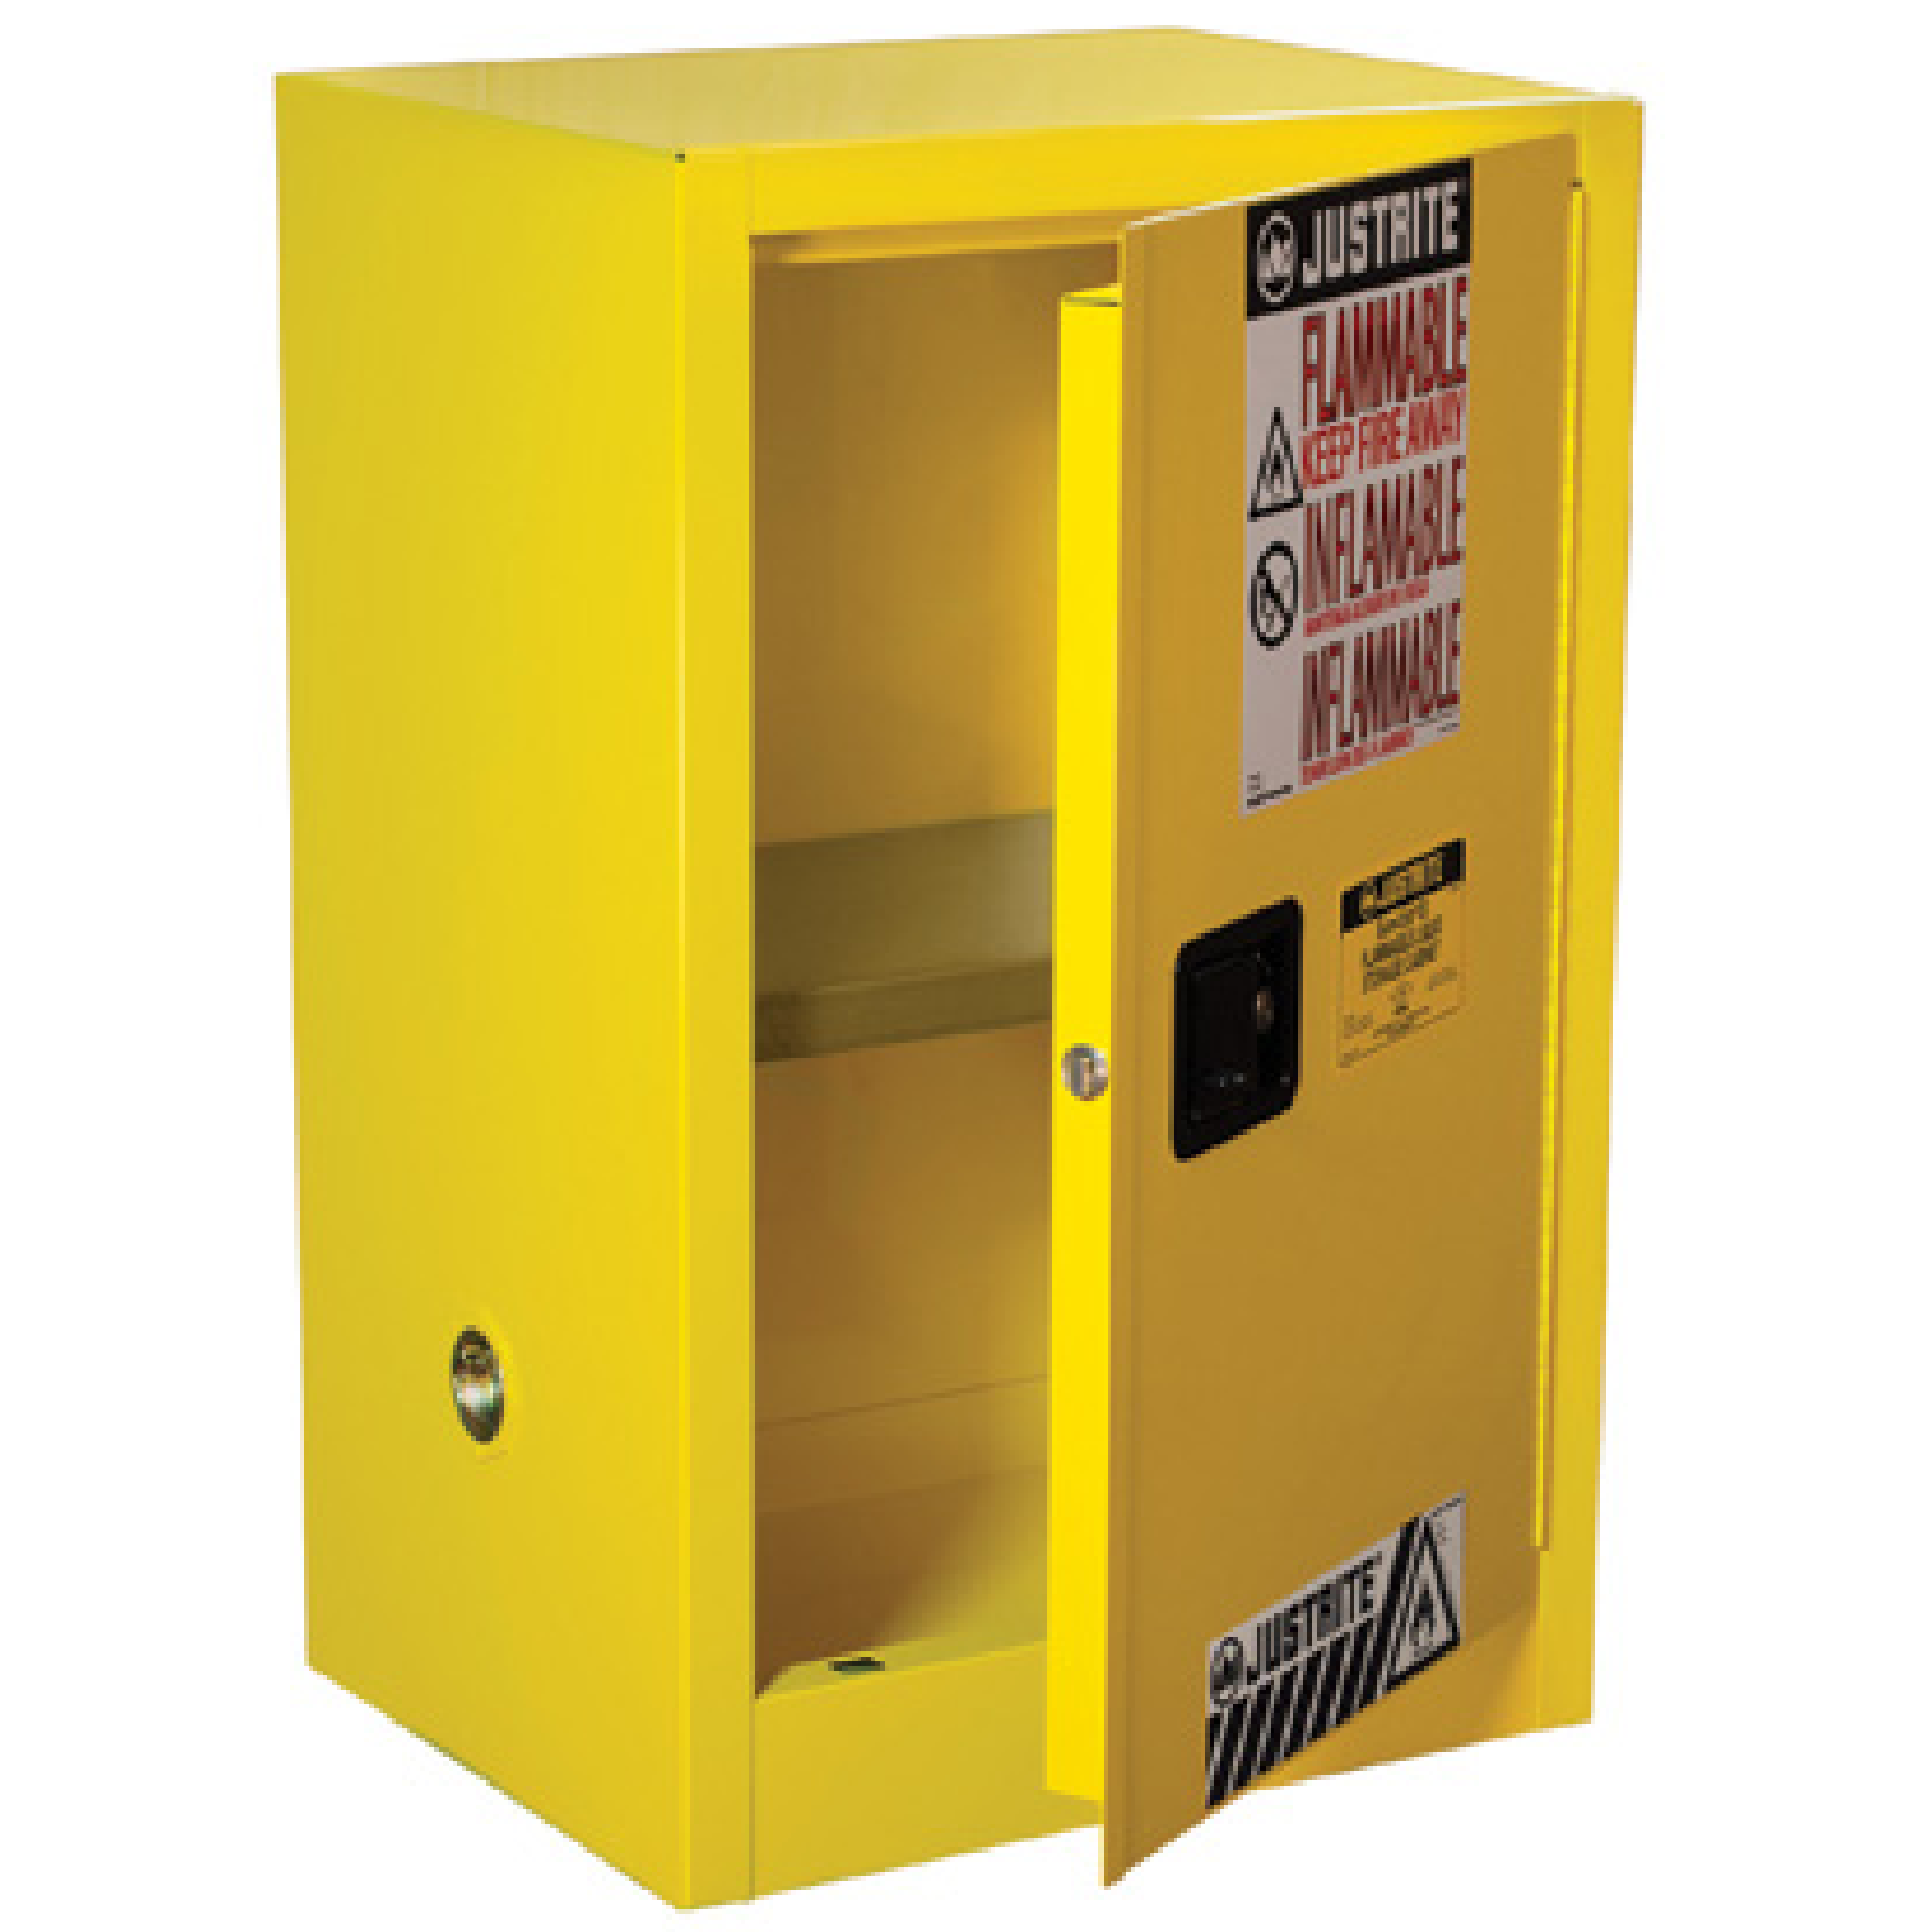 JUSTRITE 891200, Sure-Grip, Flammable Safety Cabinet, 12 GAL